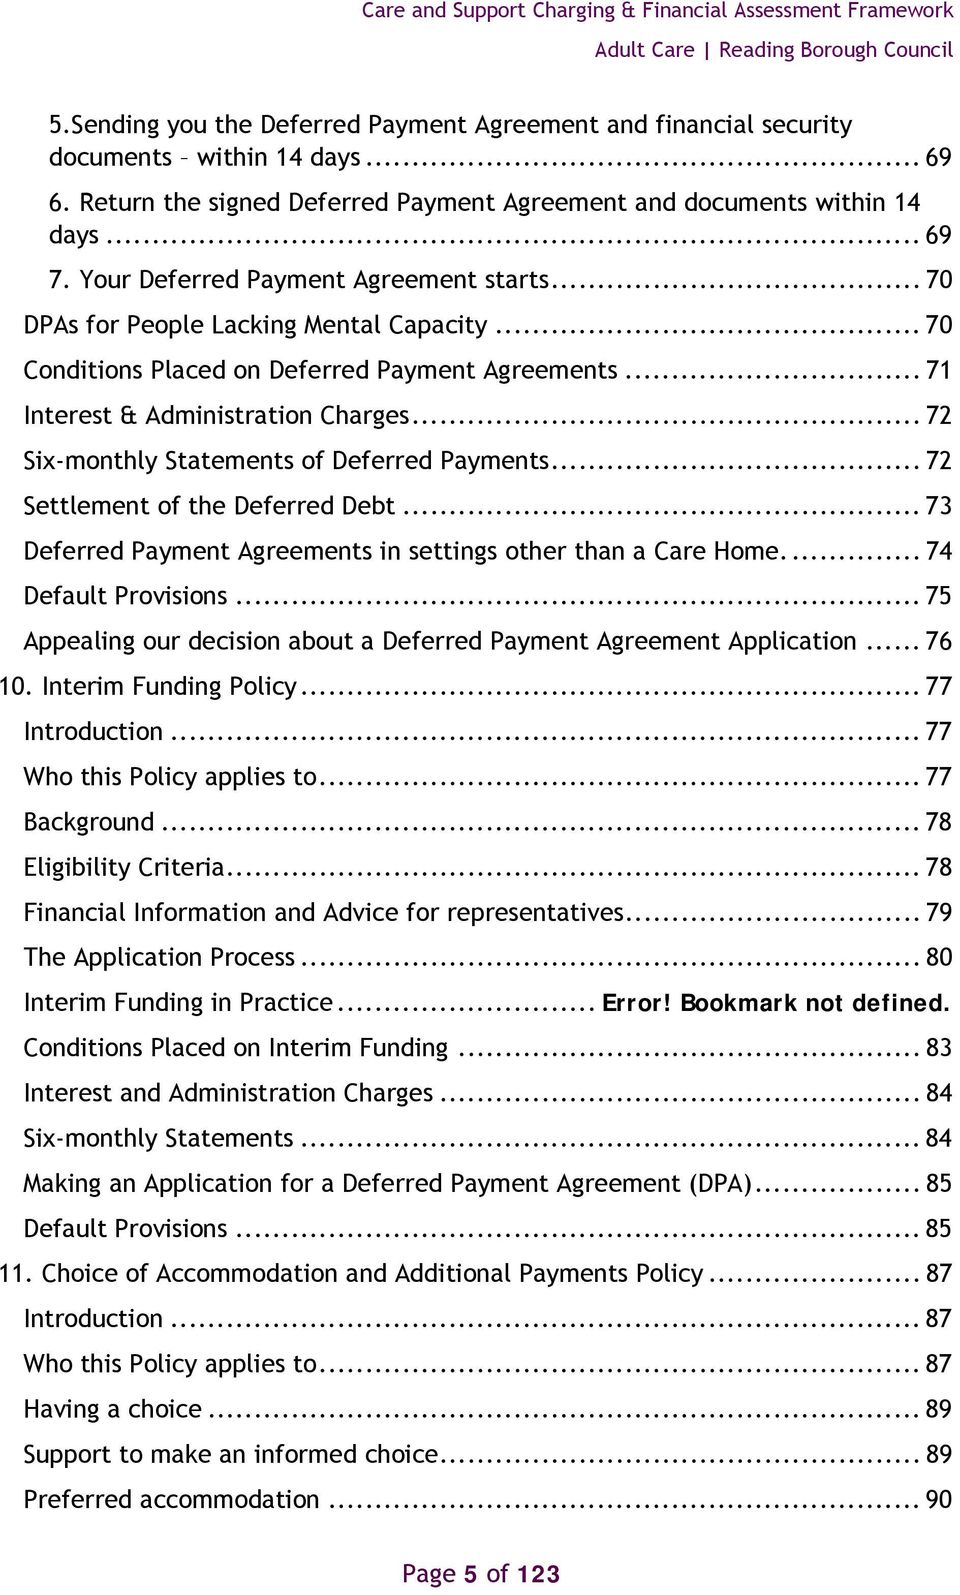 .. 72 Six-monthly Statements of Deferred Payments... 72 Settlement of the Deferred Debt... 73 Deferred Payment Agreements in settings other than a Care Home.... 74 Default Provisions.